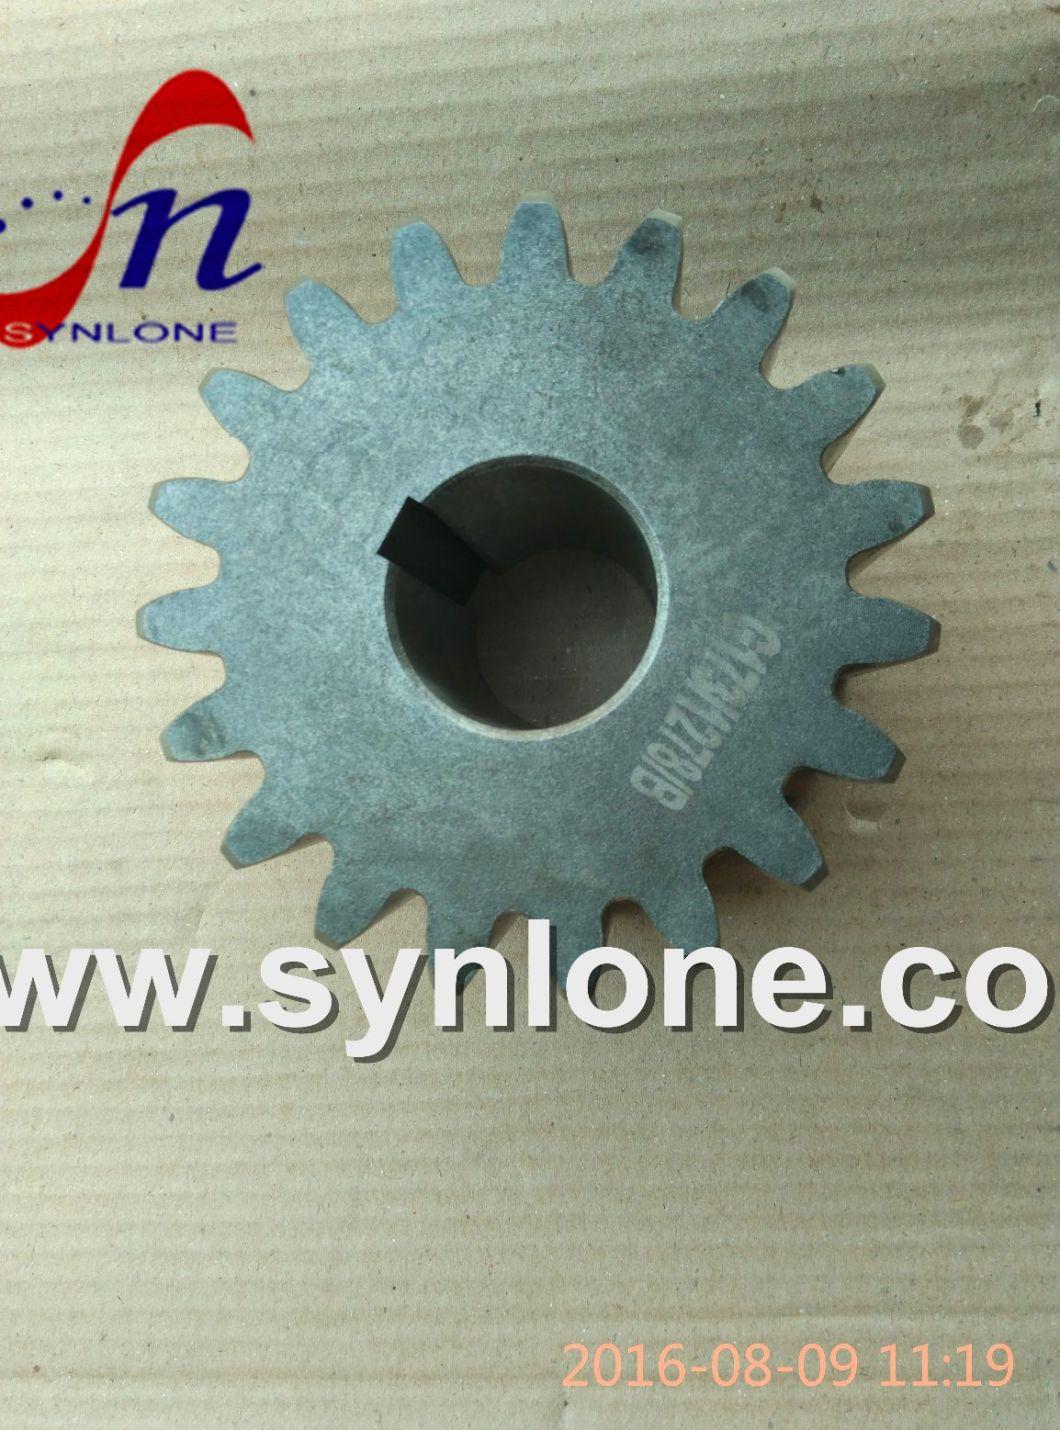 OEM Foundry Stainless Steel Worm Gear Shaft with ISO 9001 Approved